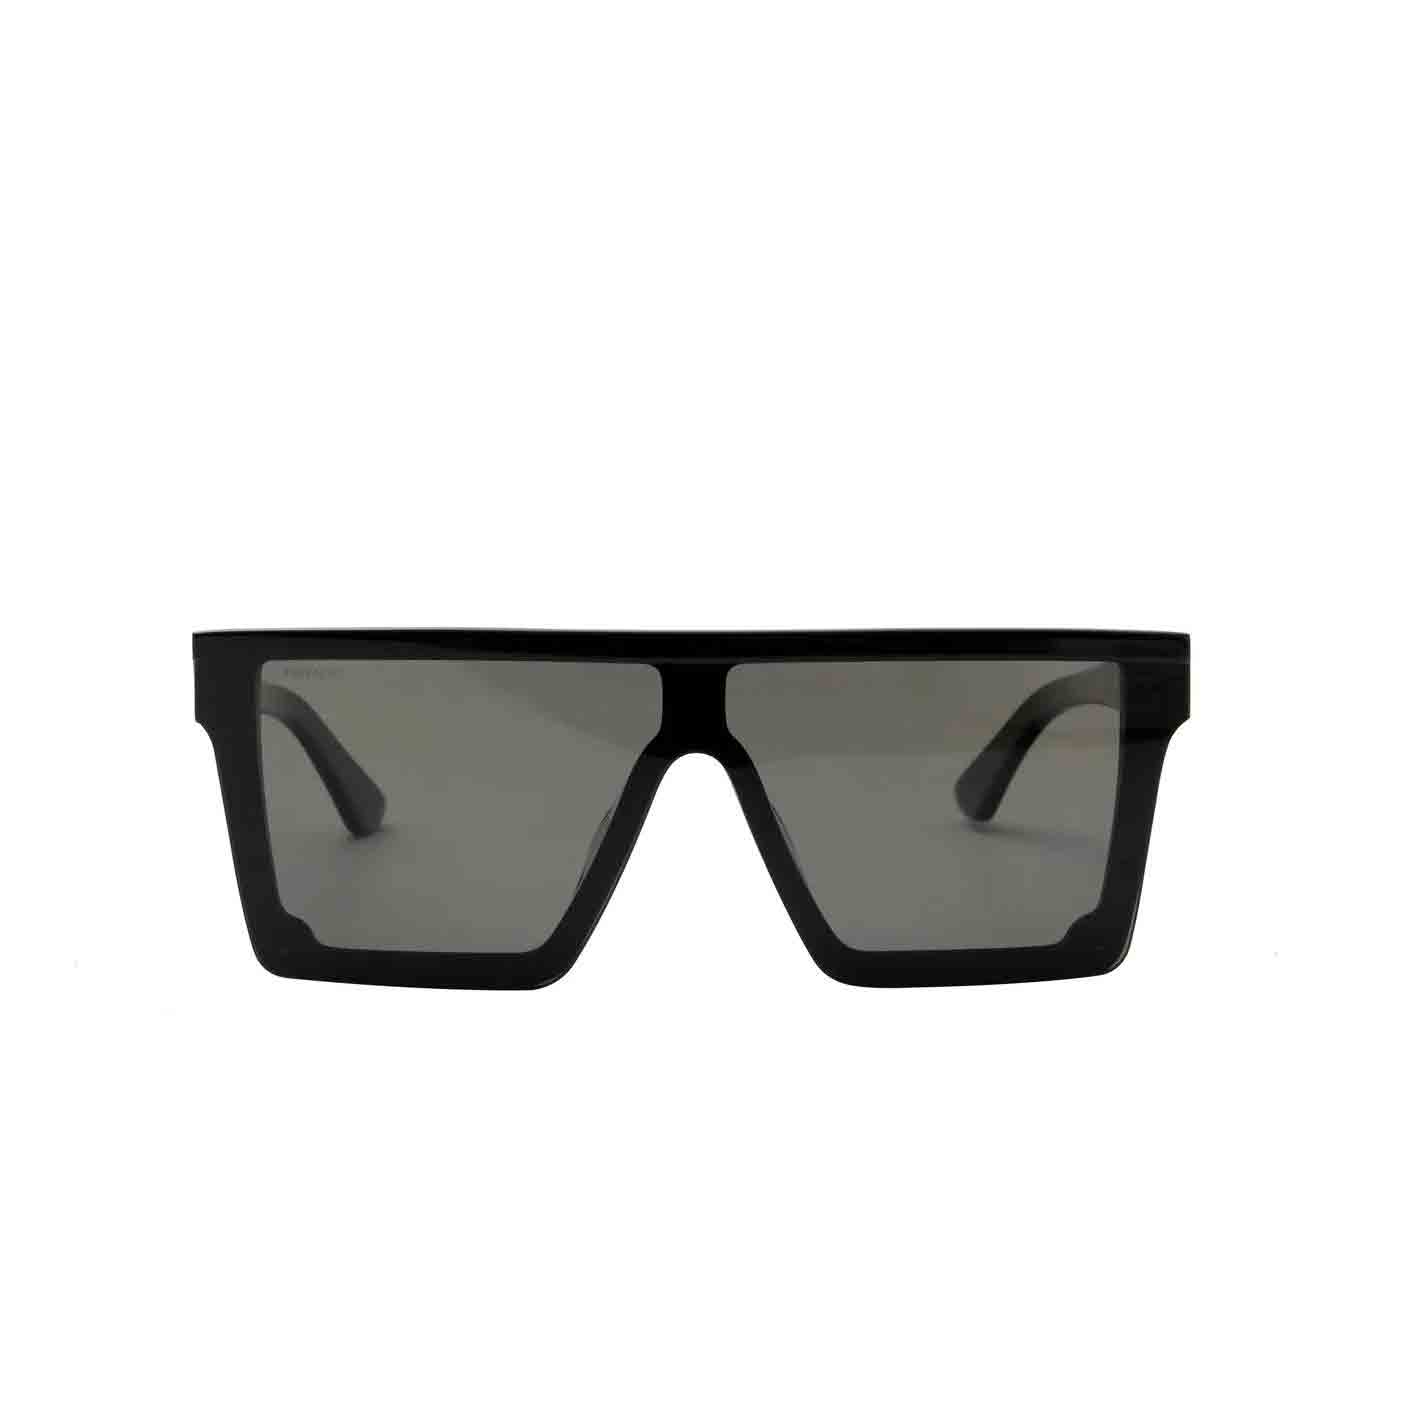 Women's Designer Square Sunglasses | Sale up to 70% off | THE OUTNET